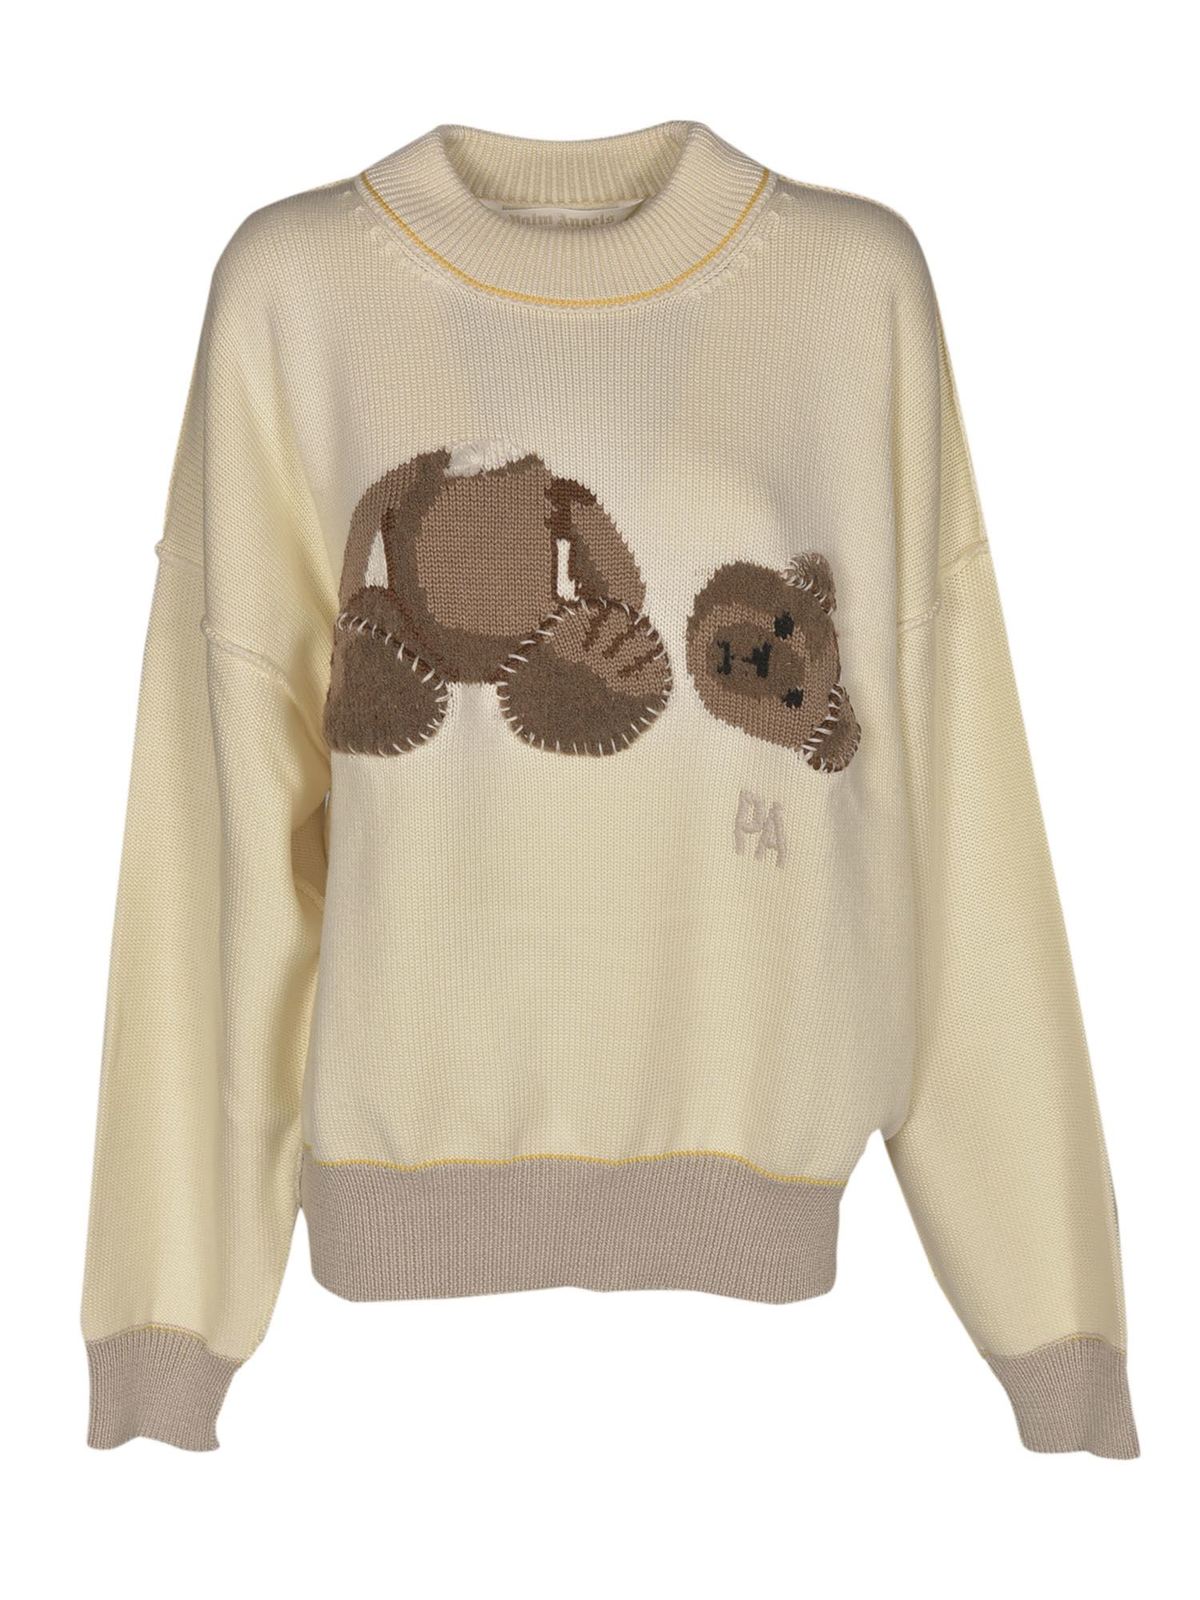 PALM ANGELS BEAR SWEATER IN CREAM COLOR